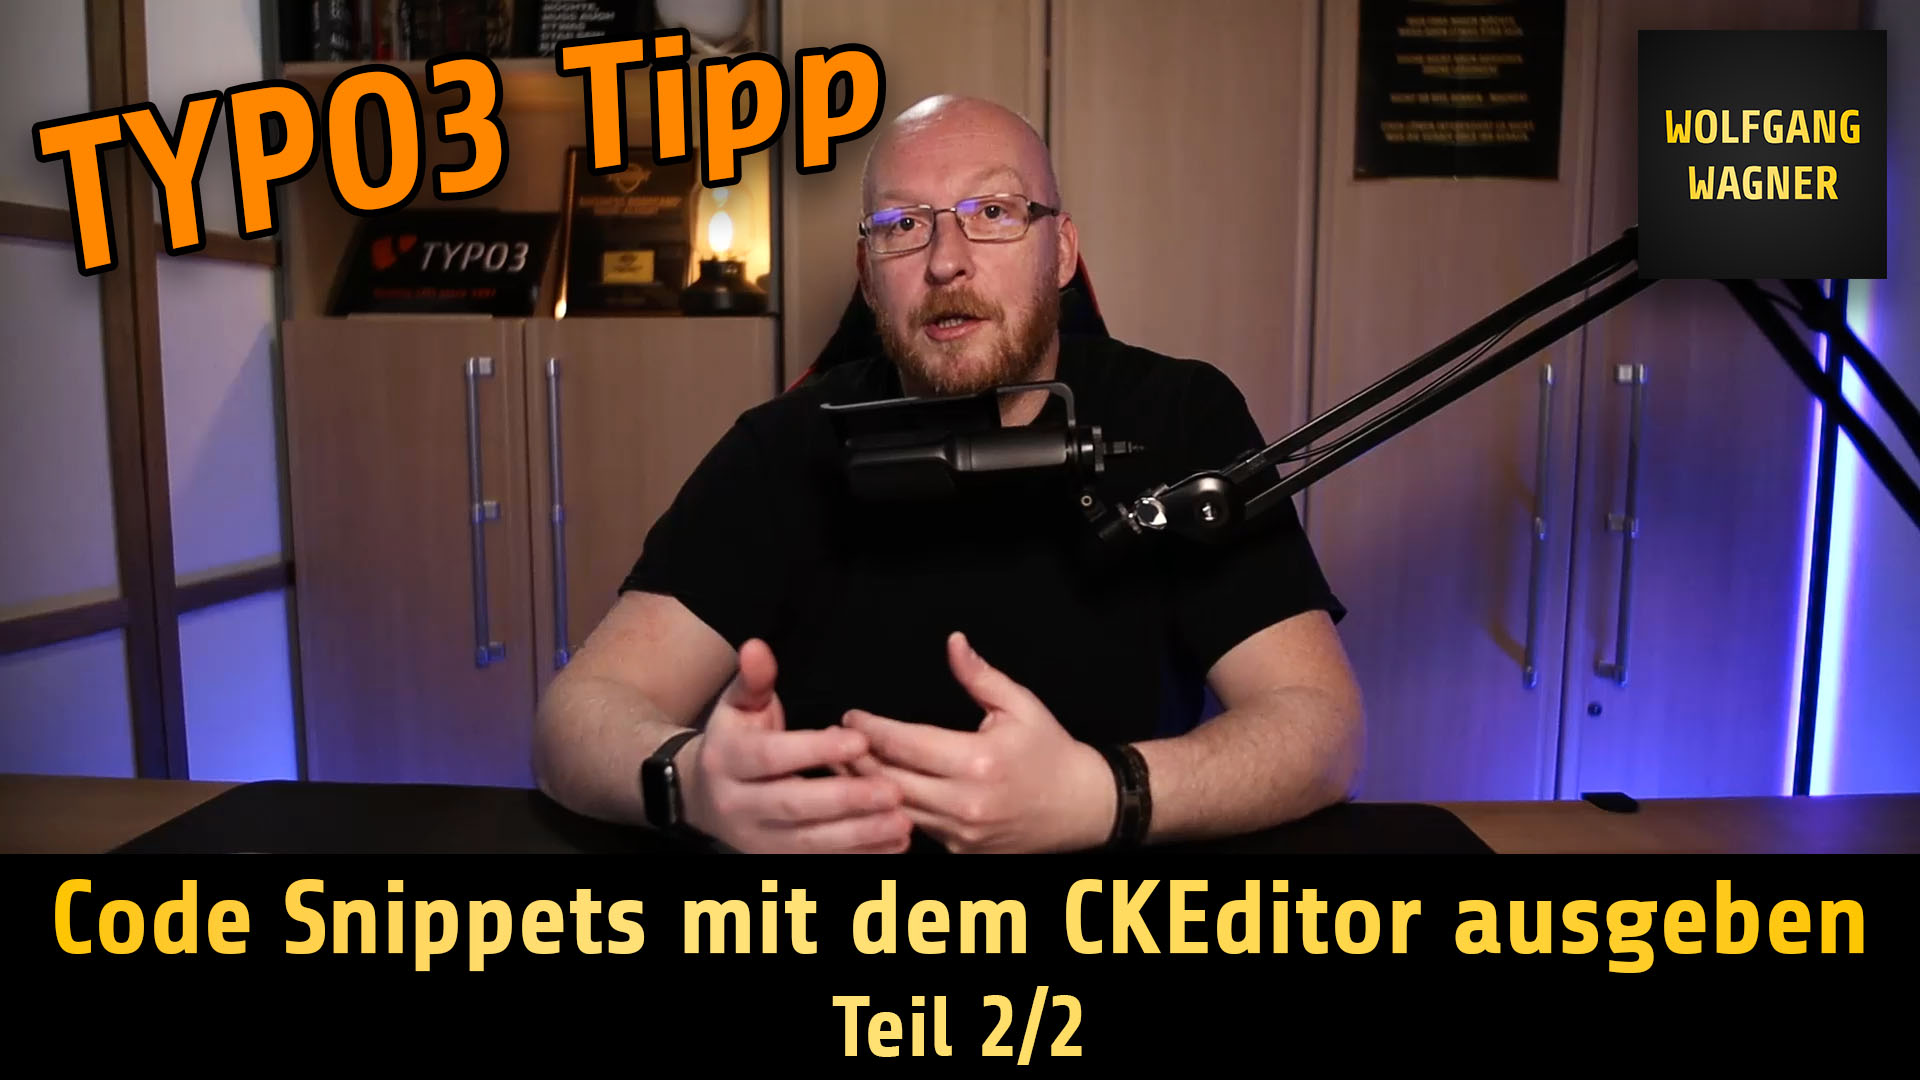 Read more about the article TYPO3-Tipp: Code Snippets mit dem CKEditor ausgeben, Teil 2/2